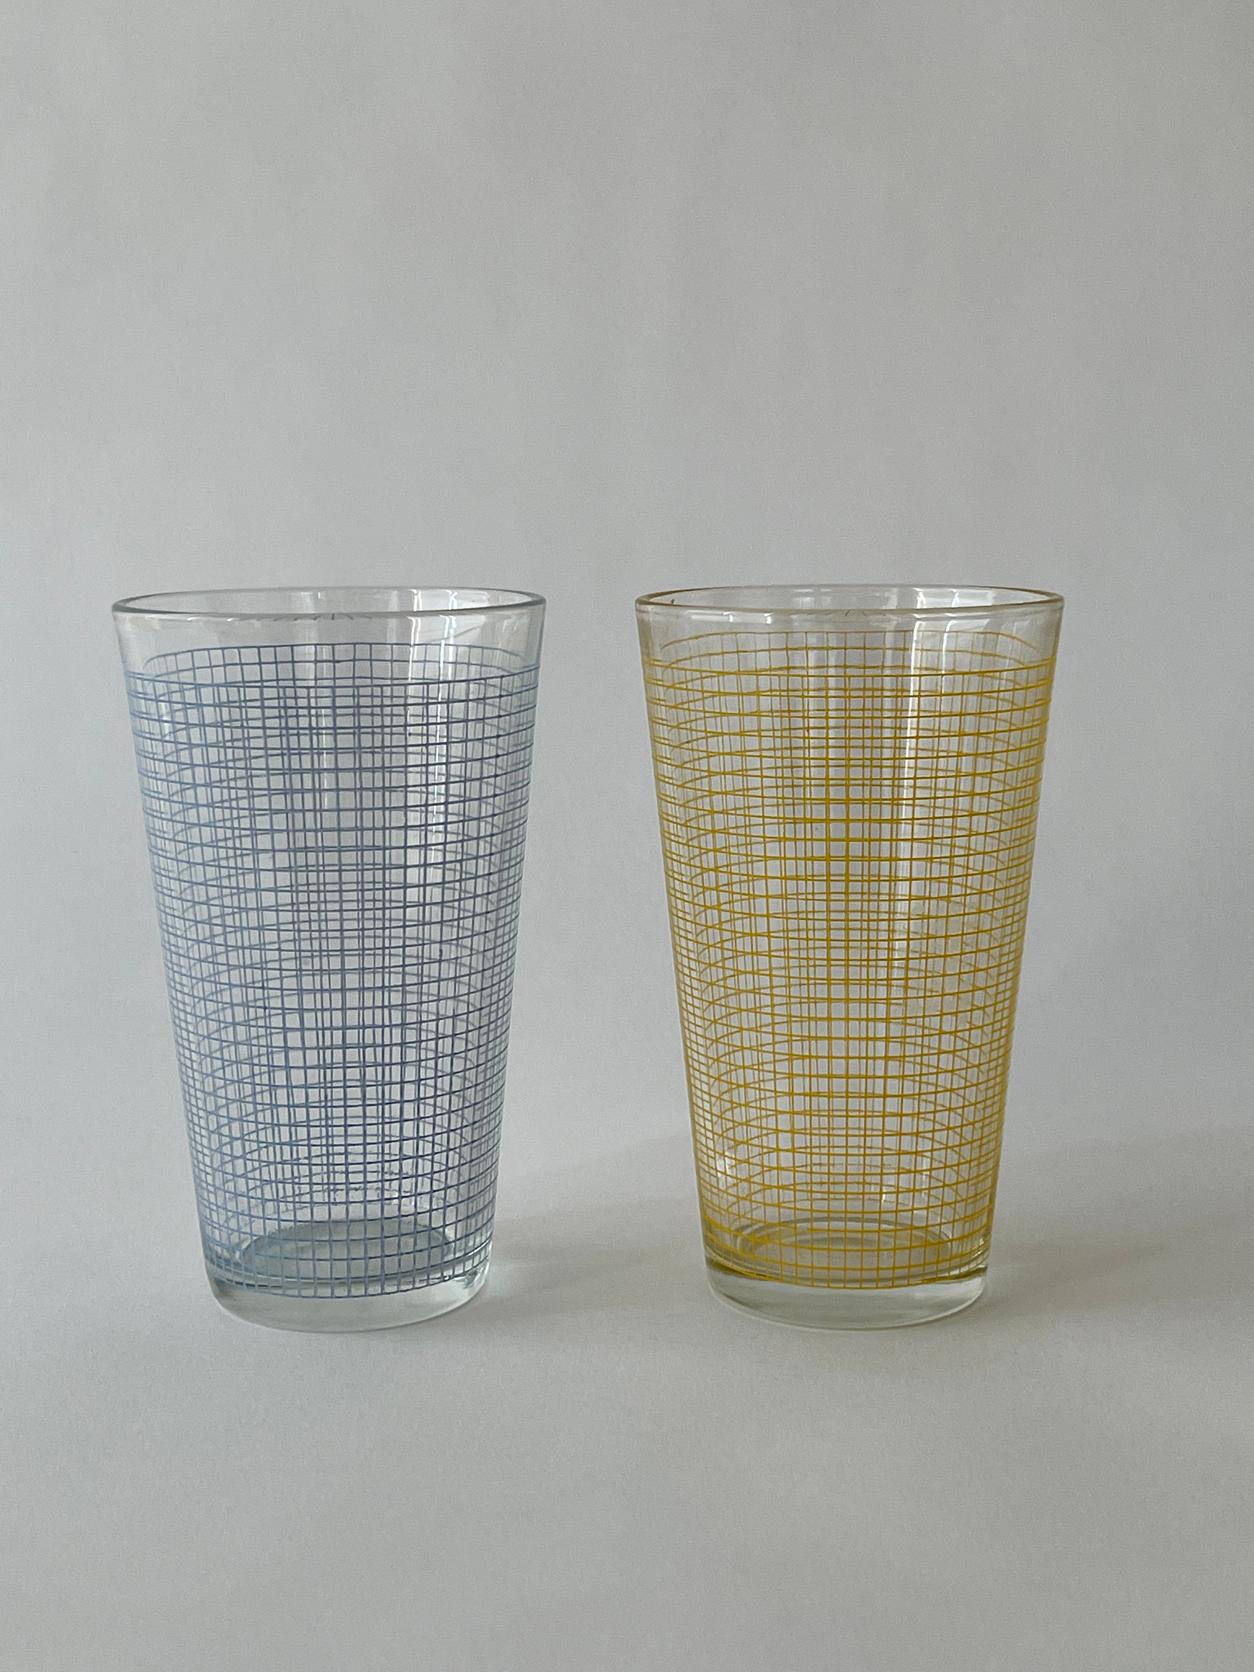 20th century Grid glasses in blue and yellow grids. 

Measures: 3.5